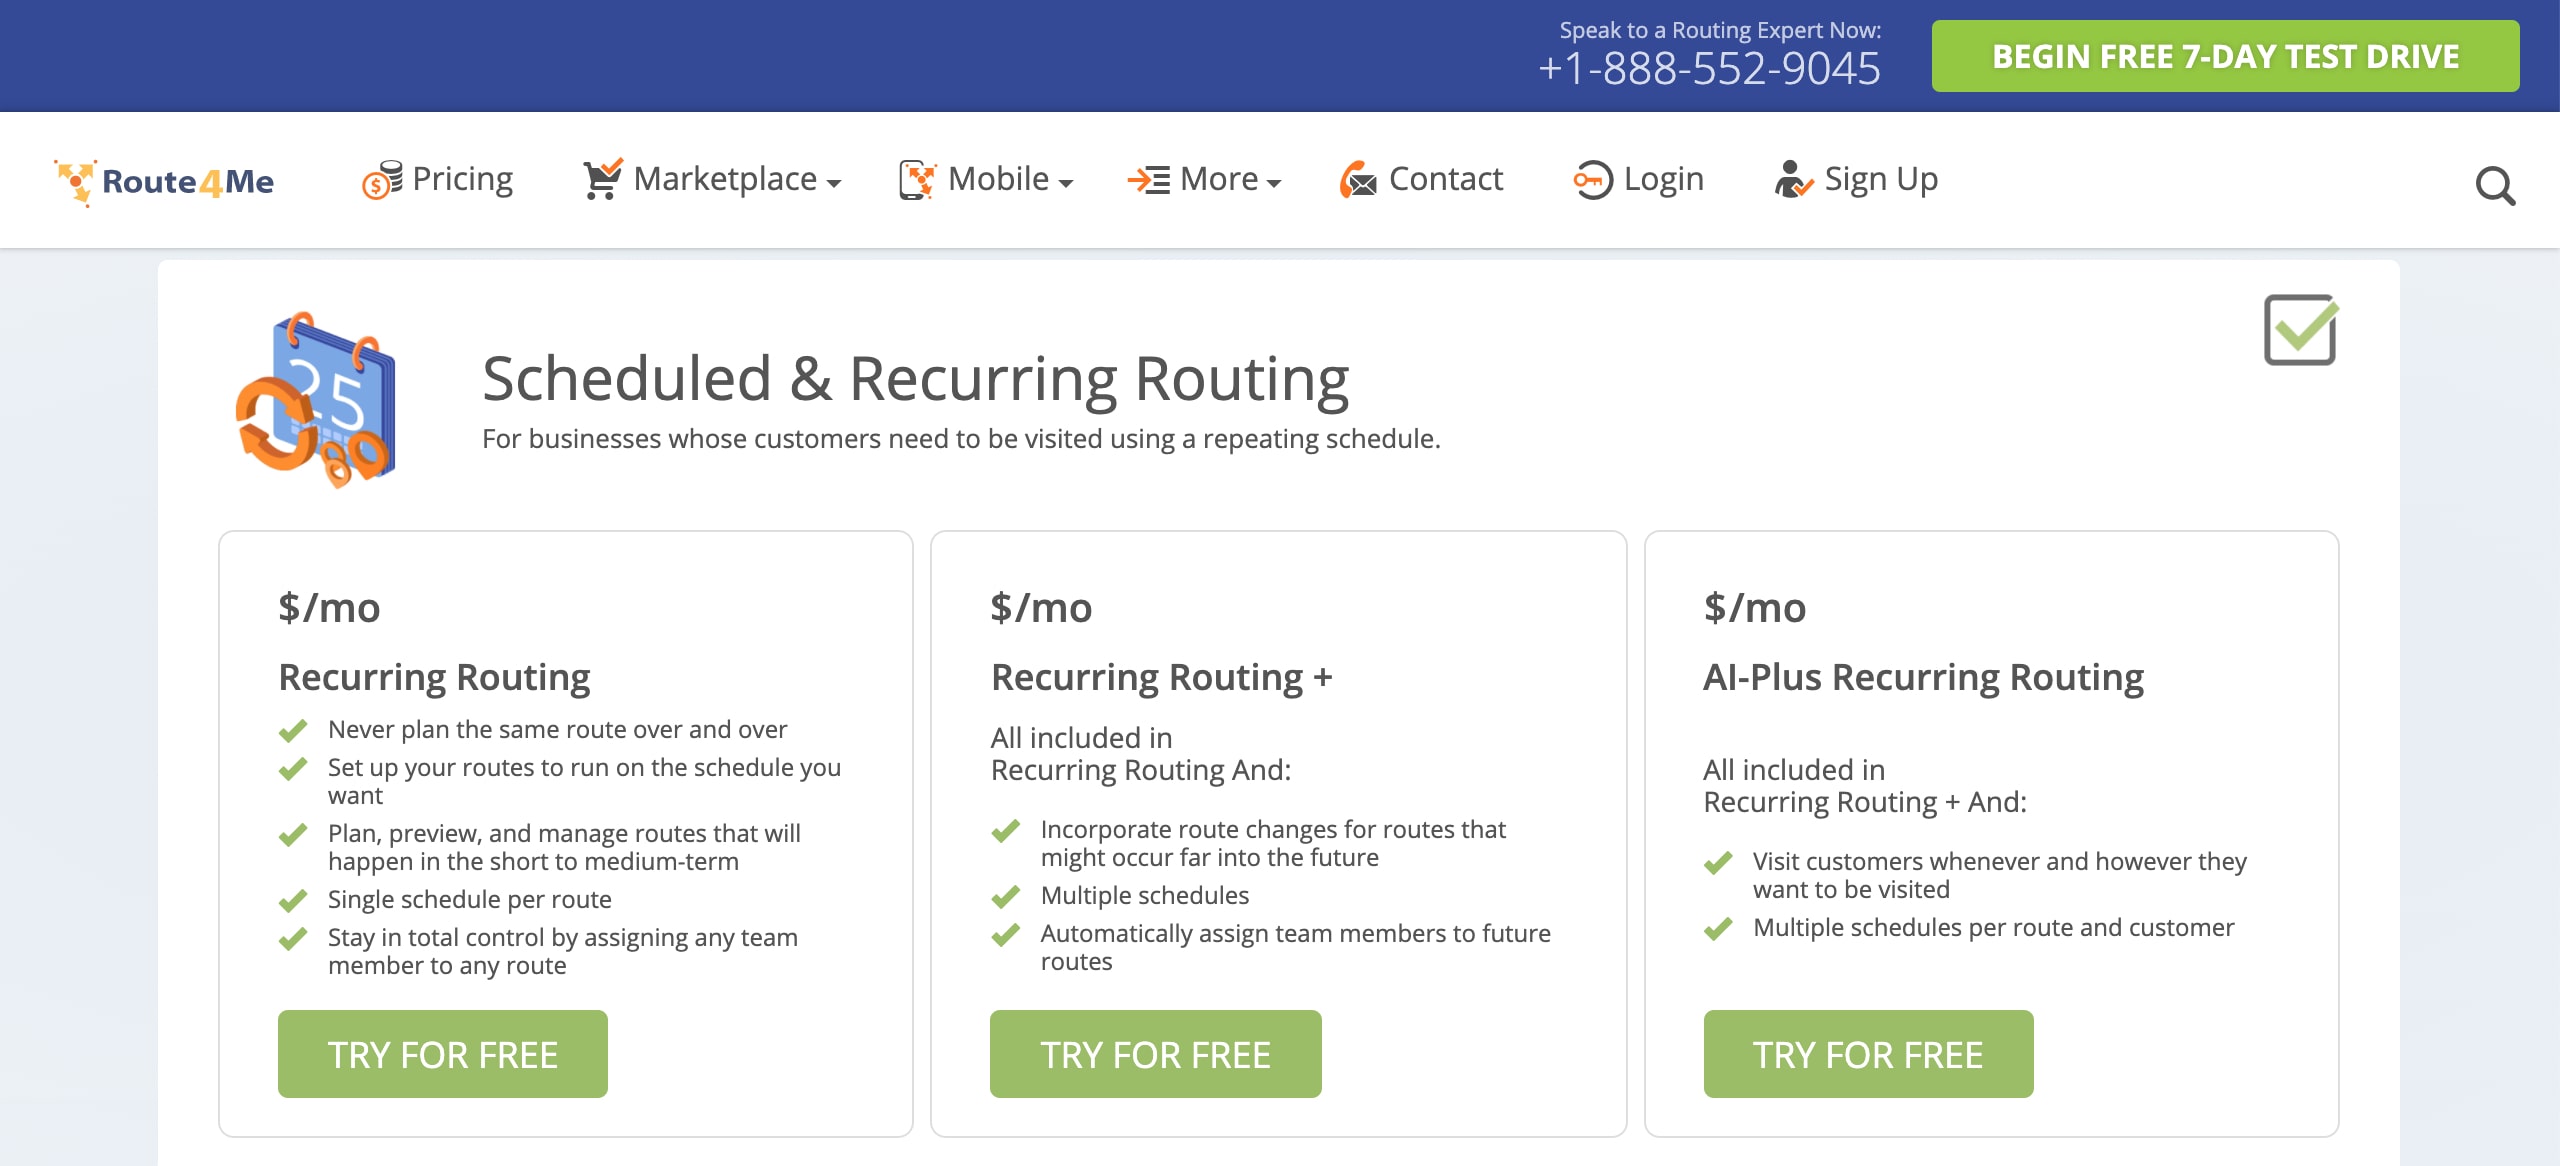 Optimize & streamline your repeating route operations with Recurring Routing software free trial.